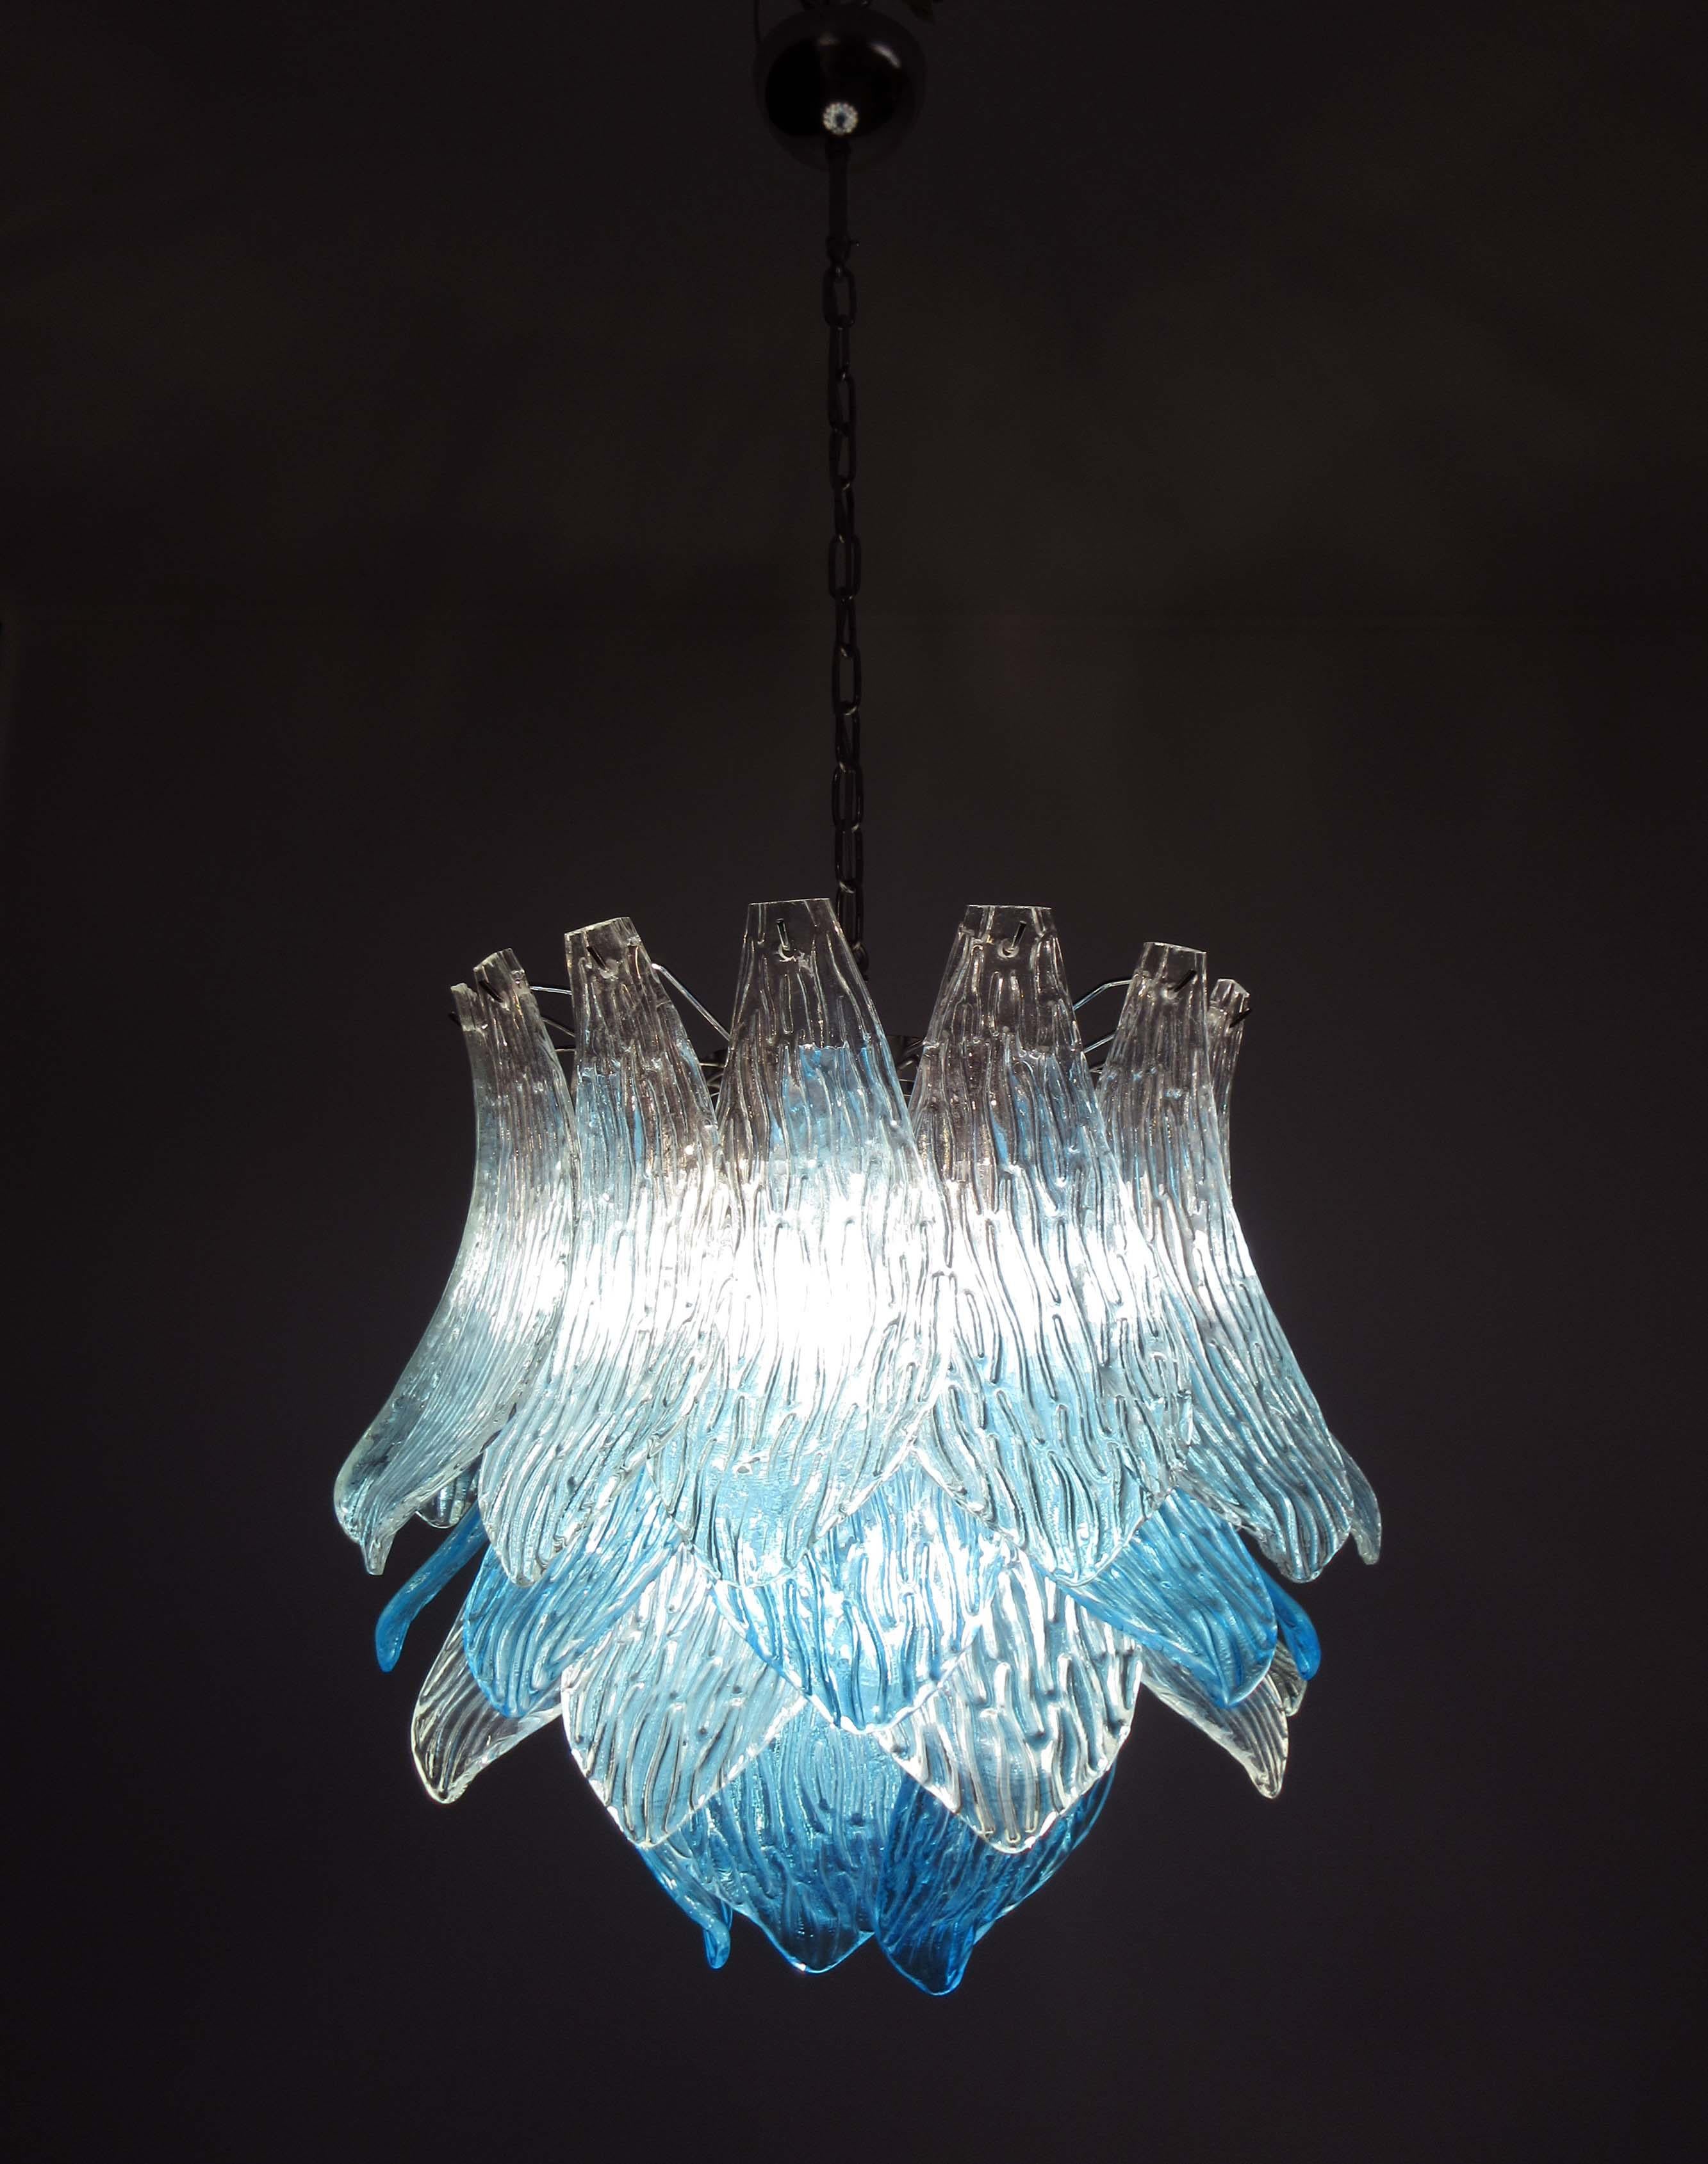 Late 20th Century Talian Vintage Murano Glass Chandelier, 38 Glasses, Blue and Trasparent